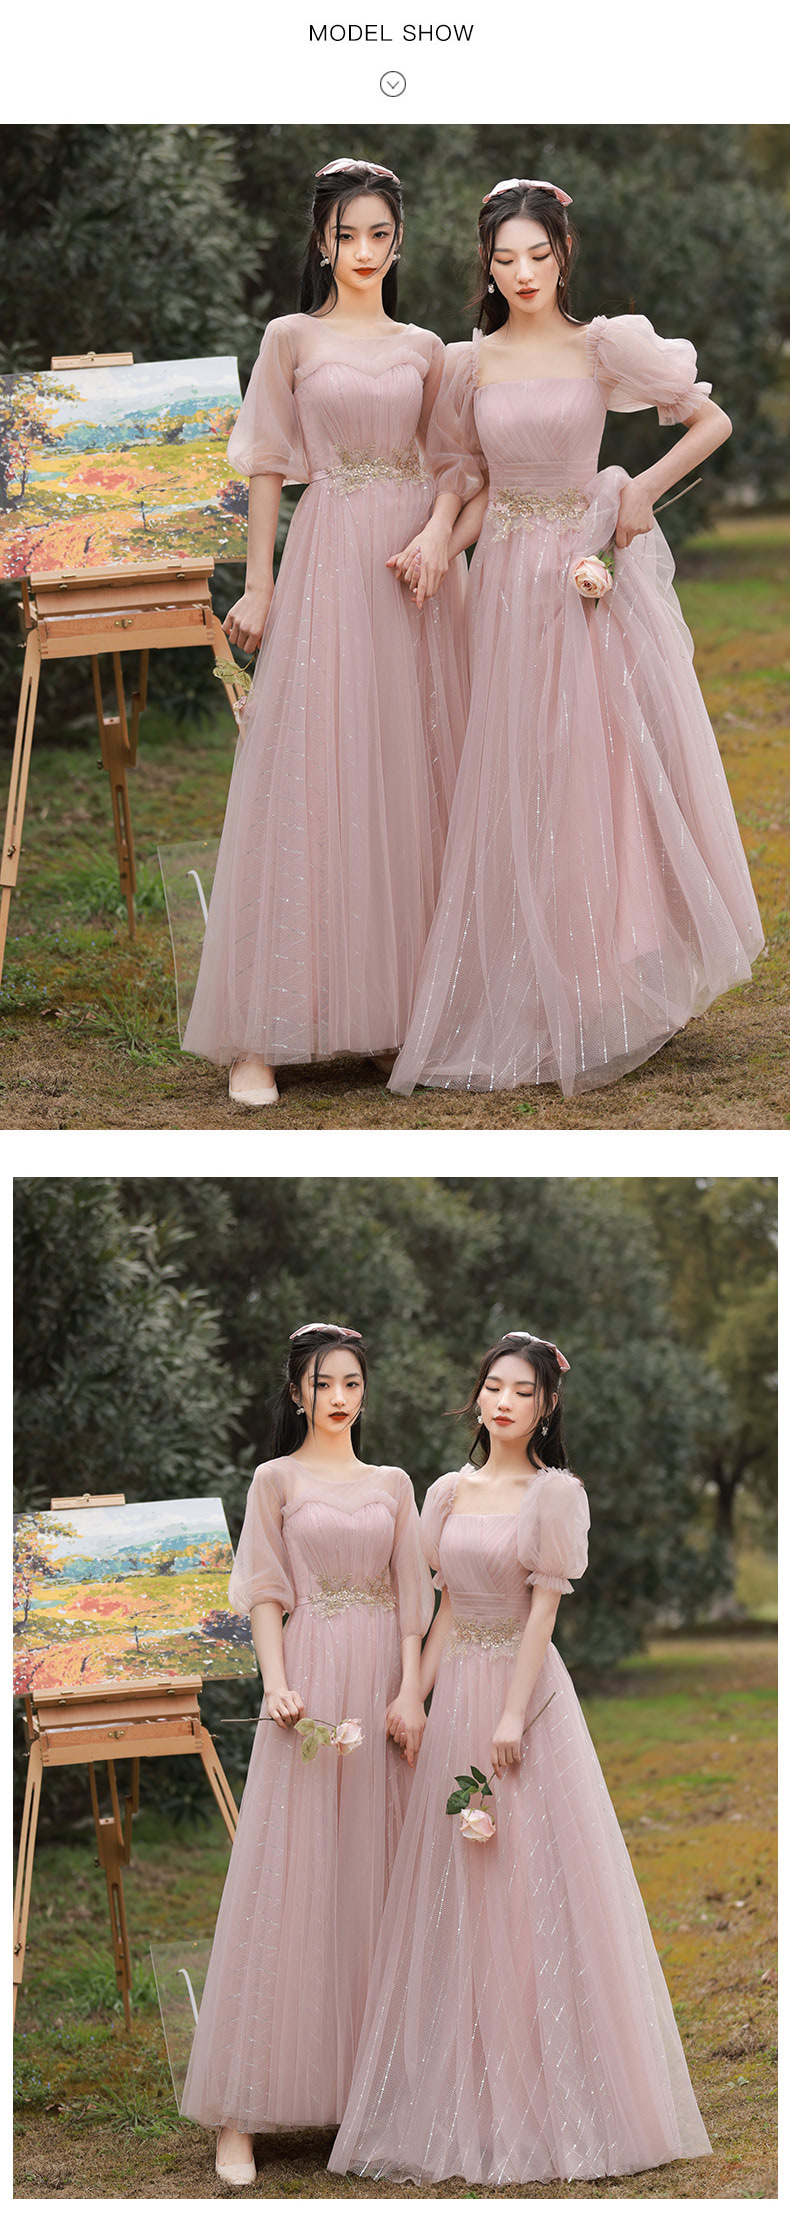 Fairy-Pink-Bridesmaid-Dress-with-Sleeves-Chiffon-Long-Casual-Gown15.jpg